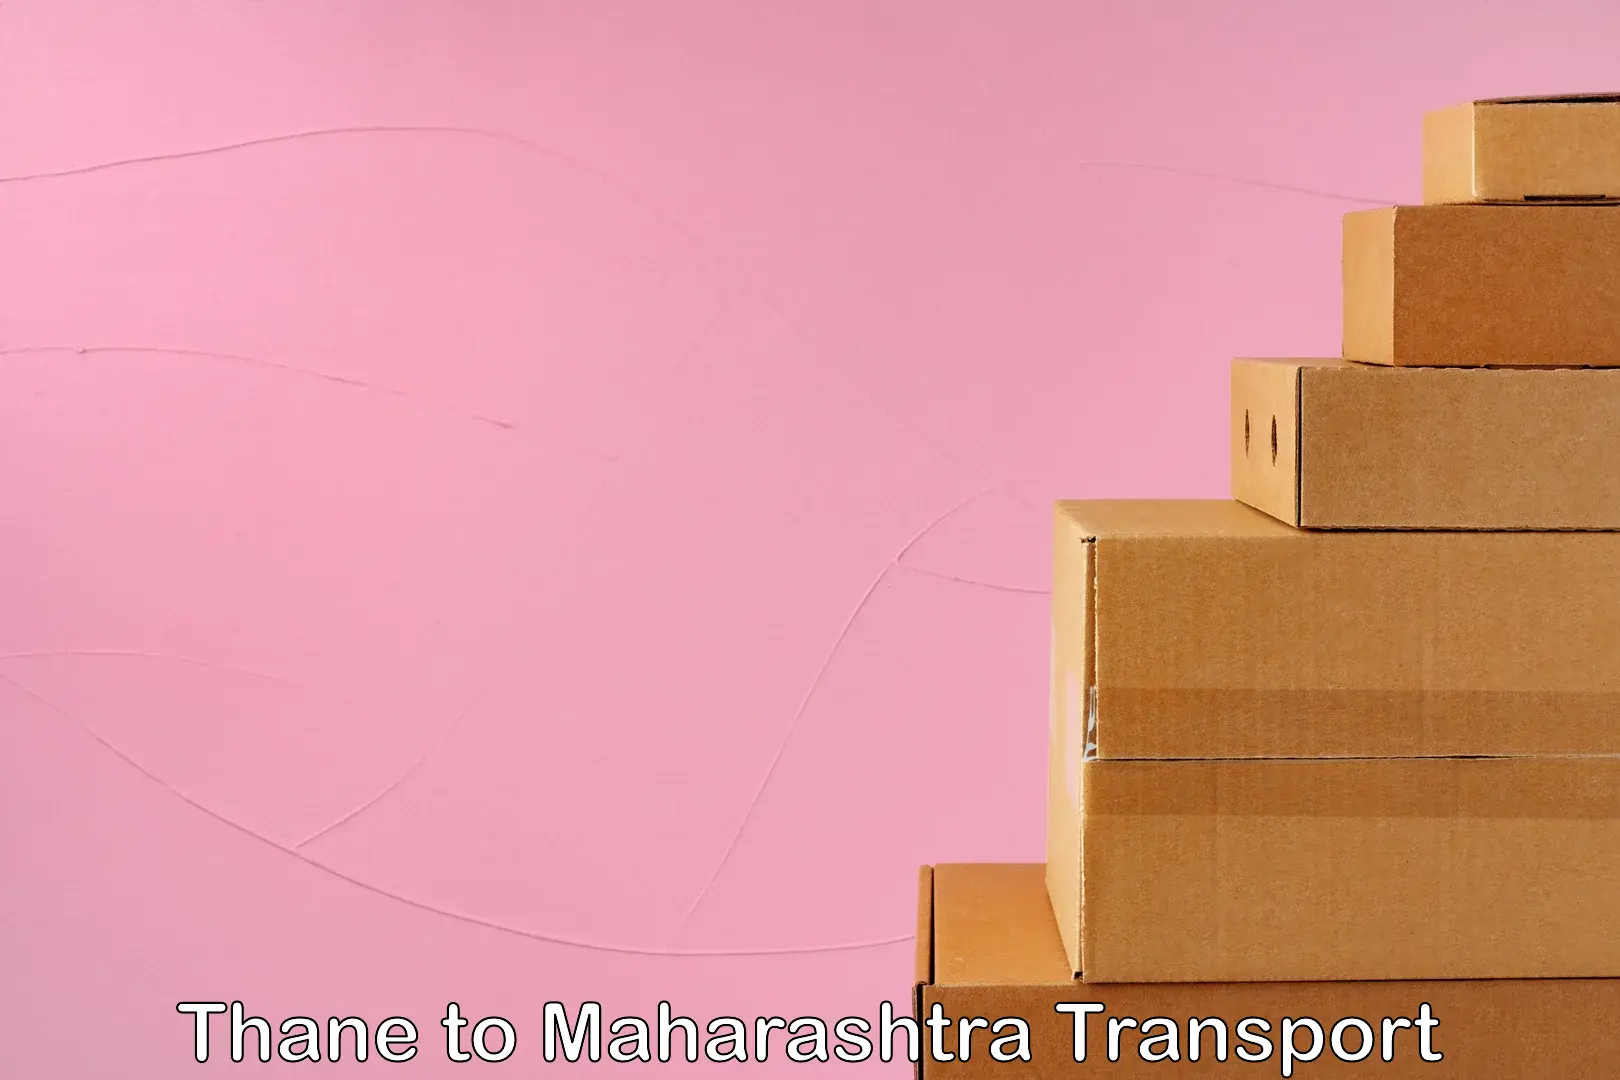 Container transport service Thane to Andheri